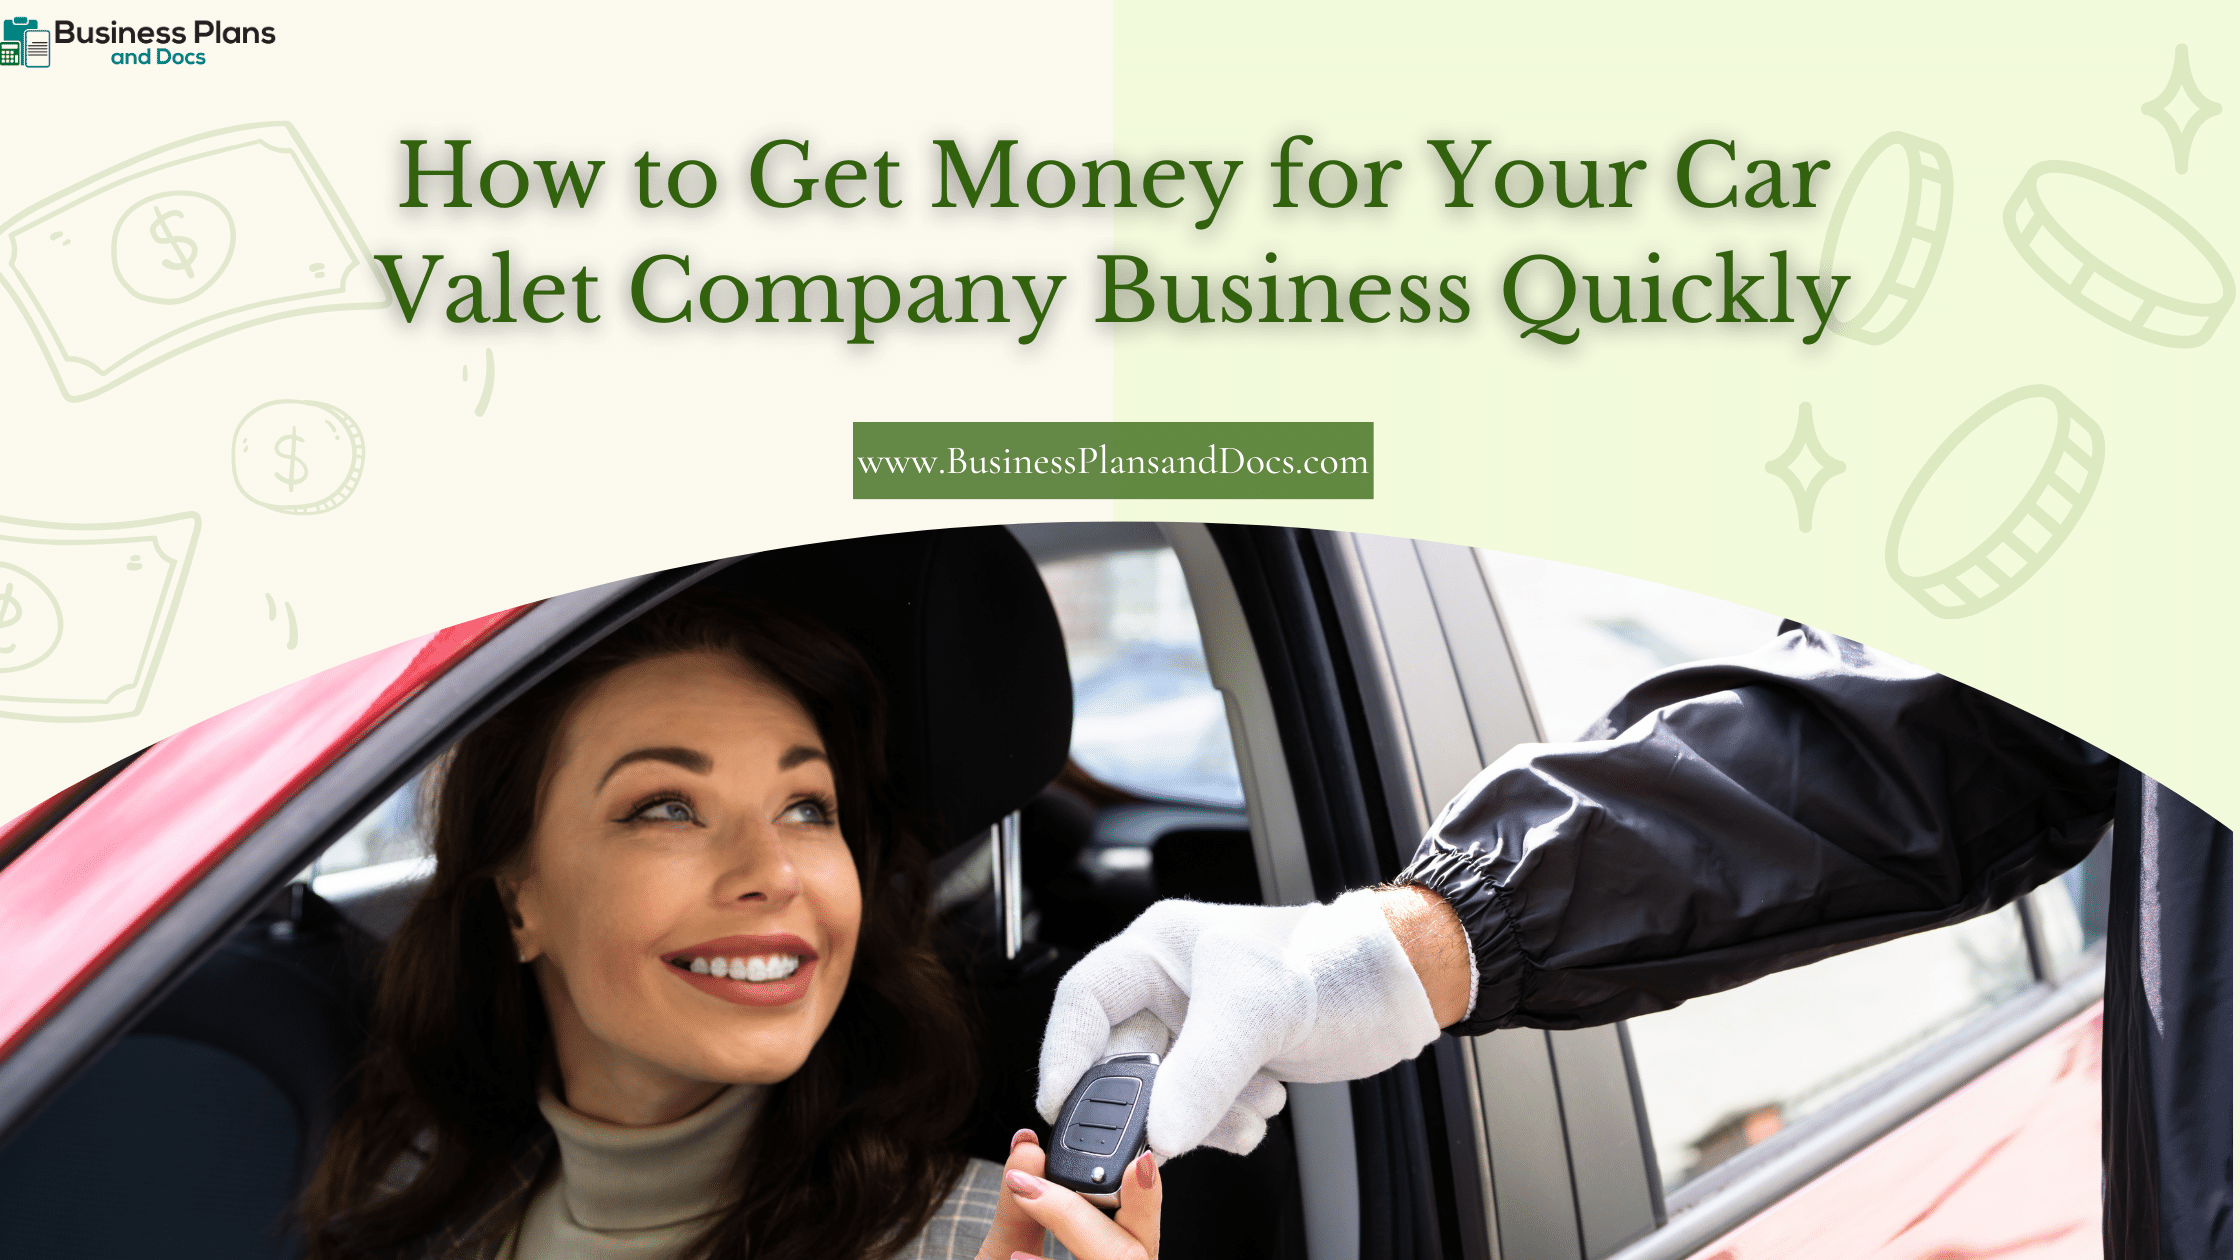 How to Get Money for Your Car Valet Company Business Quickly